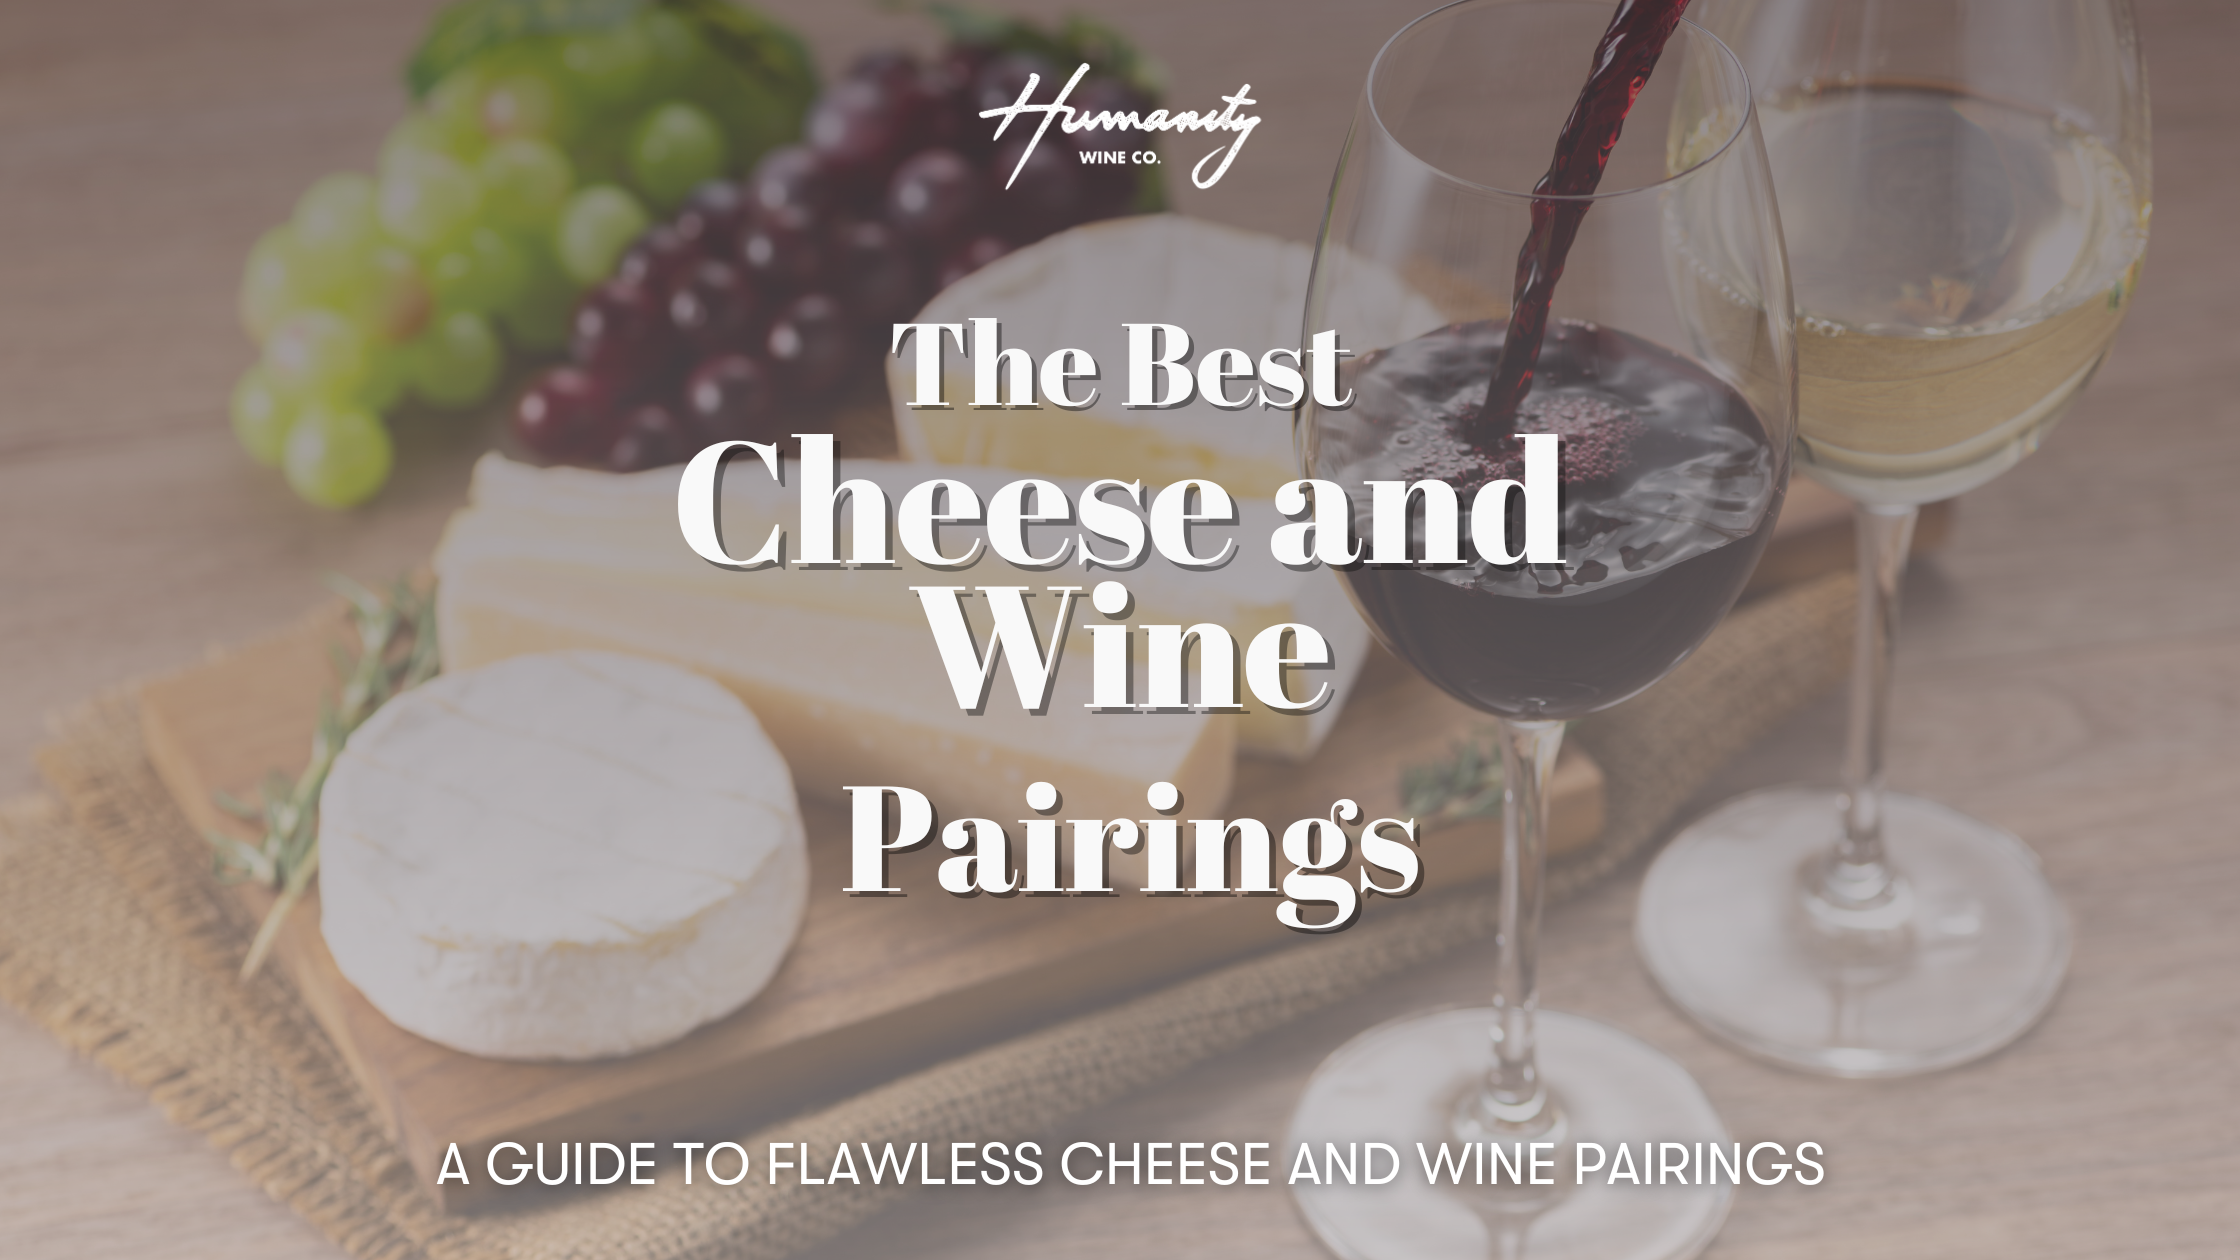 the Best Cheese and Wine Pairings for pairing parties, cheese board and wine in the background